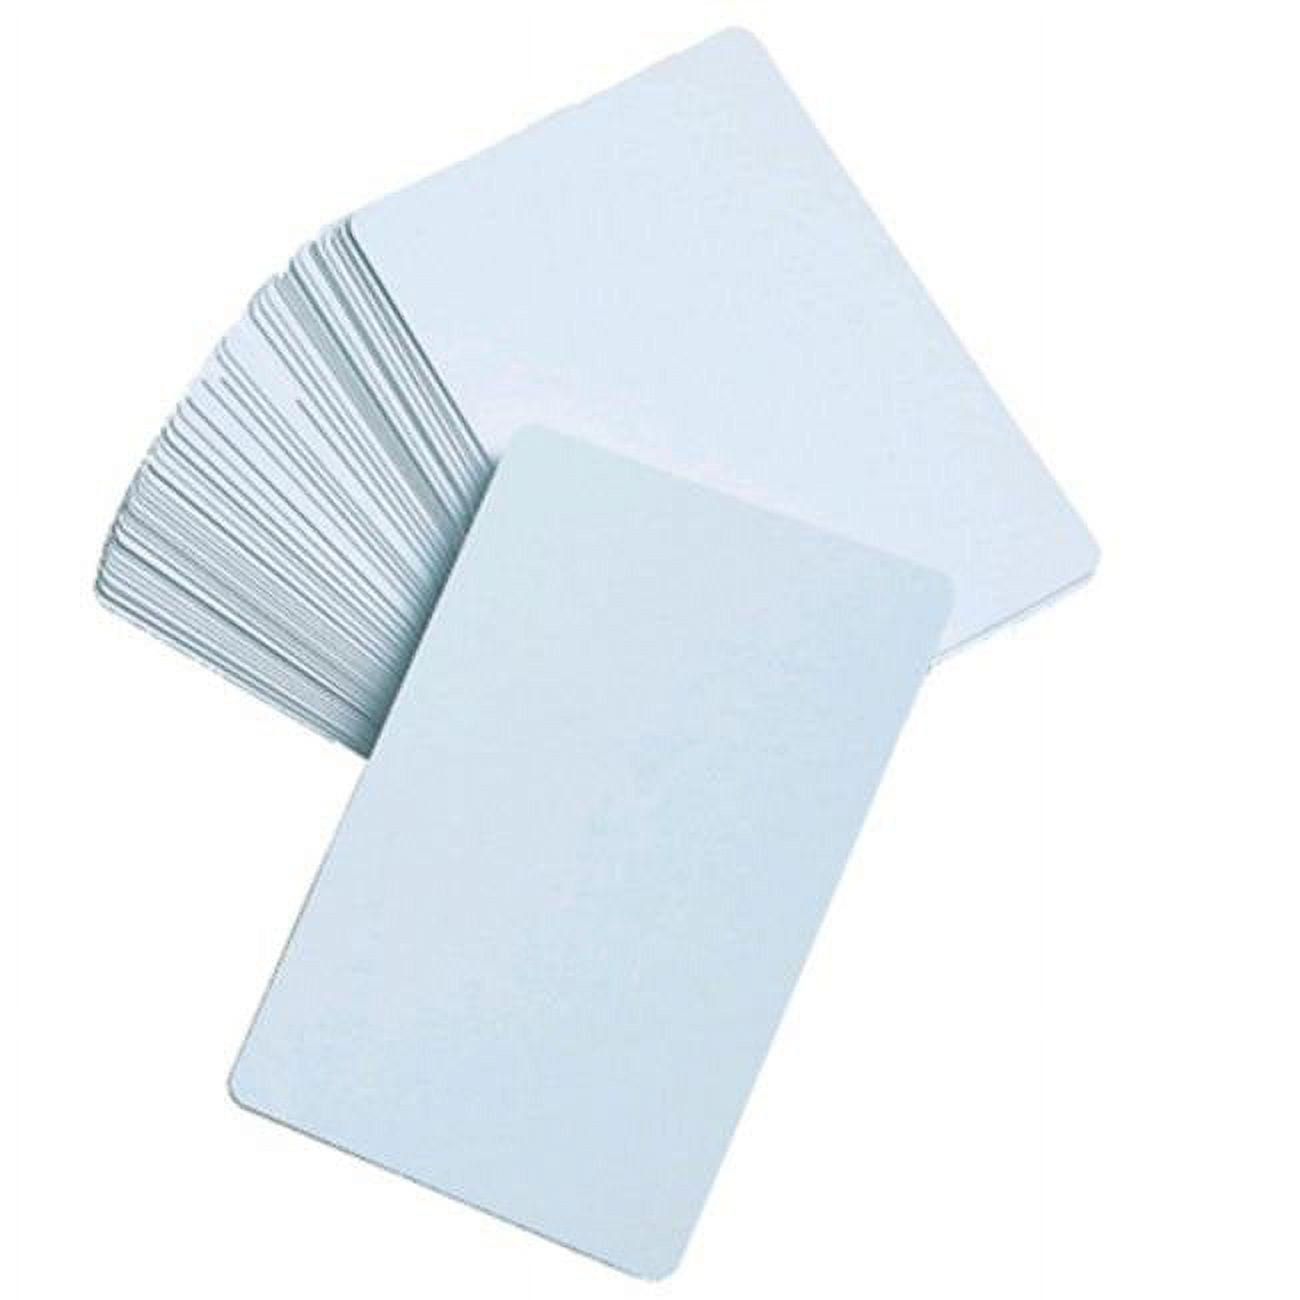 Giant Blank Playing Cards (3.5 inch x 5.75 inch) (Matte Finish) 